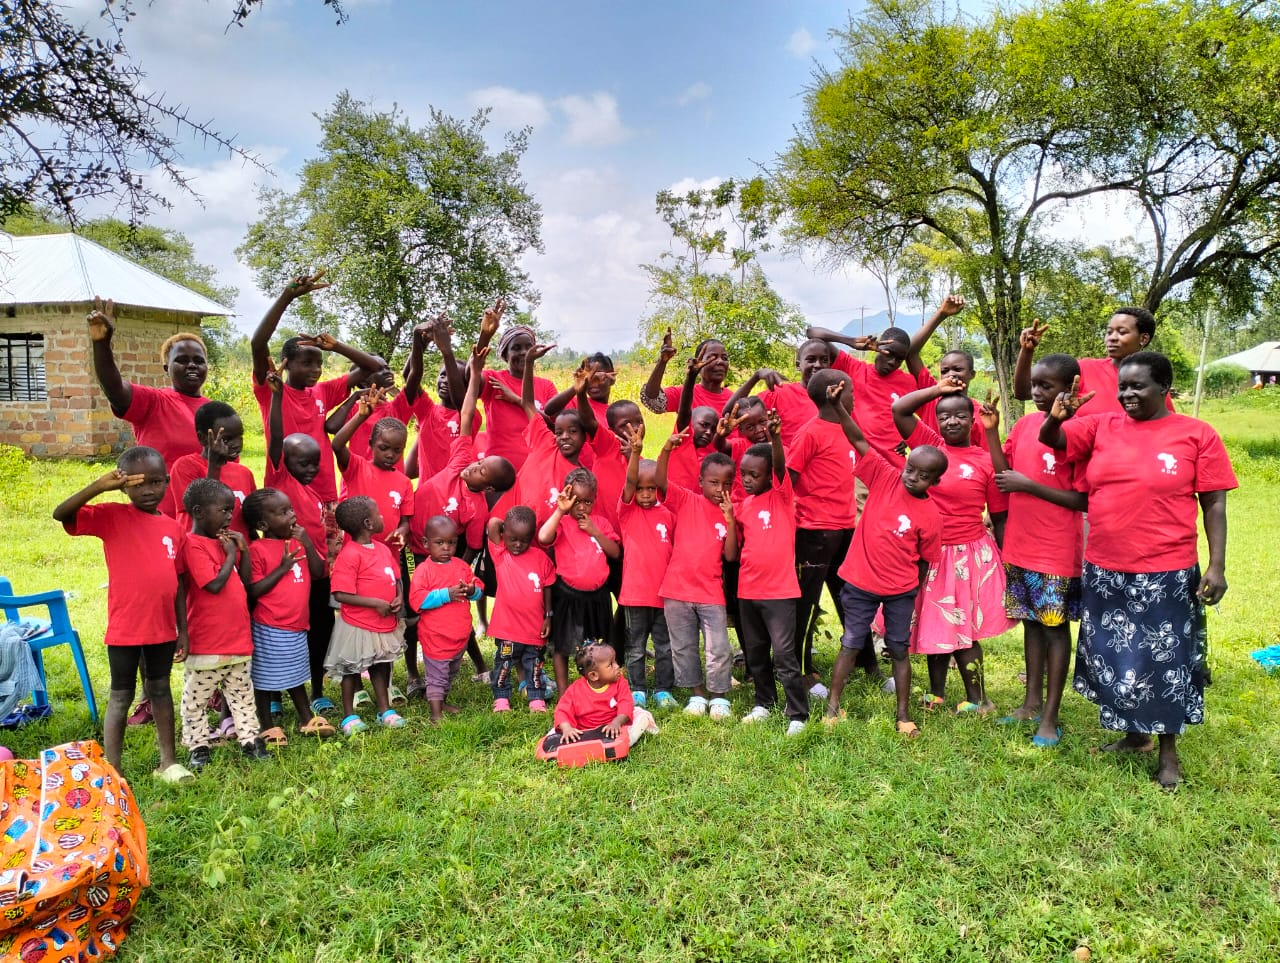 Energetic children and adults in red RDM.life t-shirts celebrating dance in Kenya, uplifting their community with joy and unity.